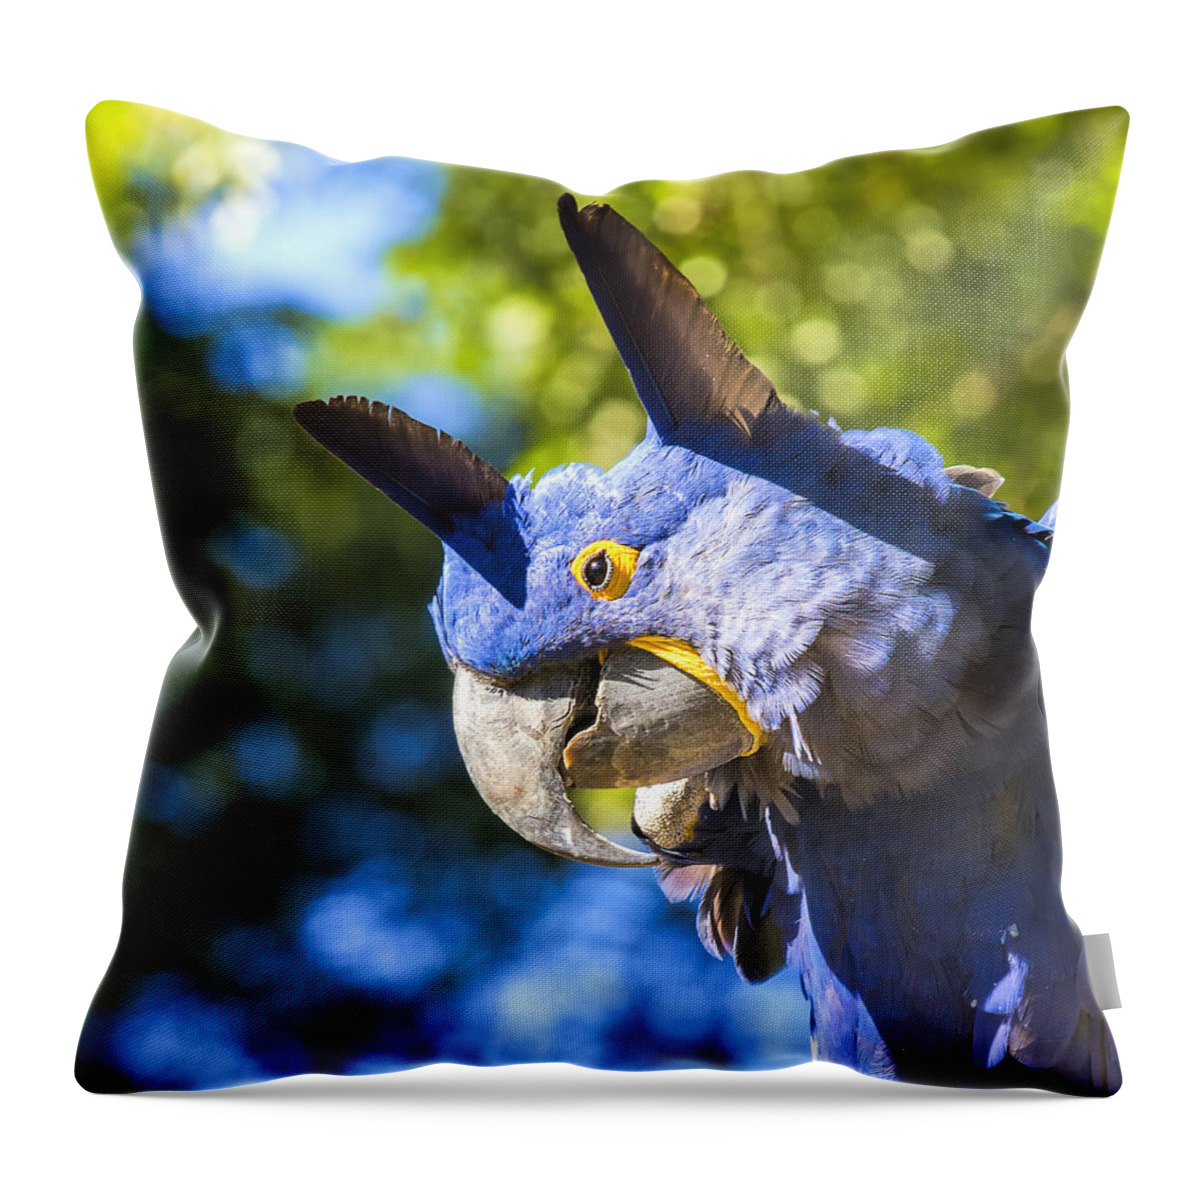 Hyacinth Macaw Throw Pillow featuring the photograph Blue Hyacinth Pose by Bill and Linda Tiepelman